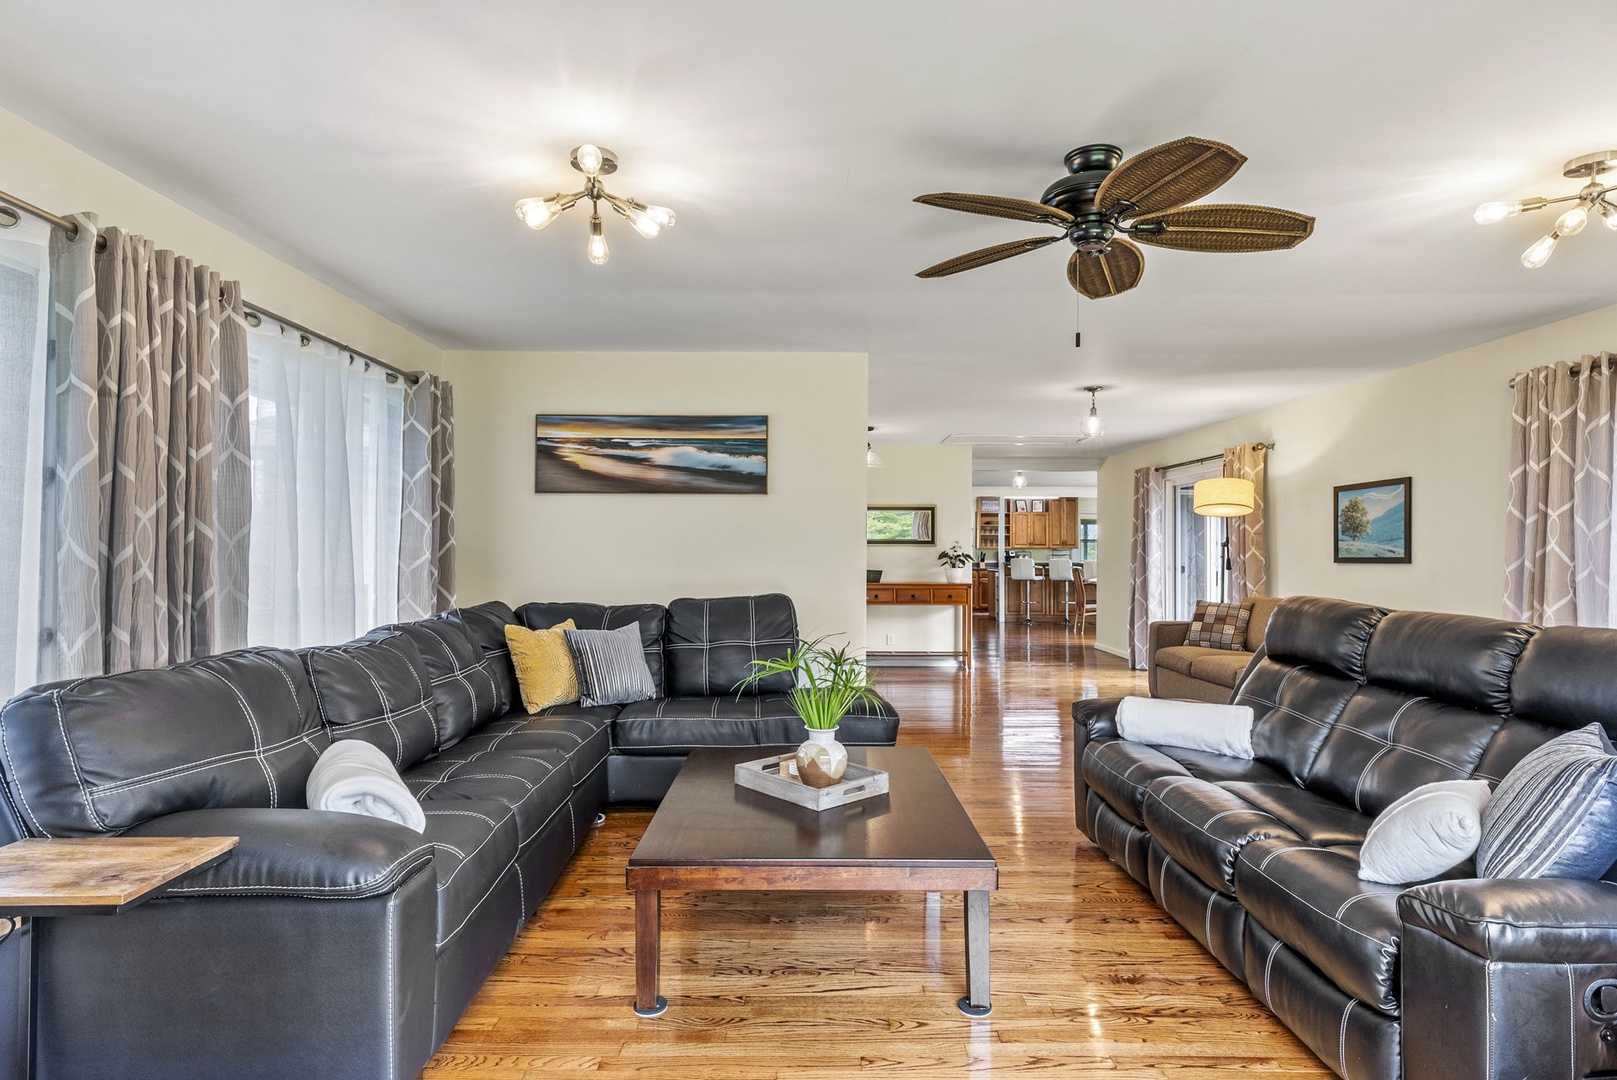 Hauula Vacation Rentals, Mau Loa Hale - Open concept living space with natural wood flooring